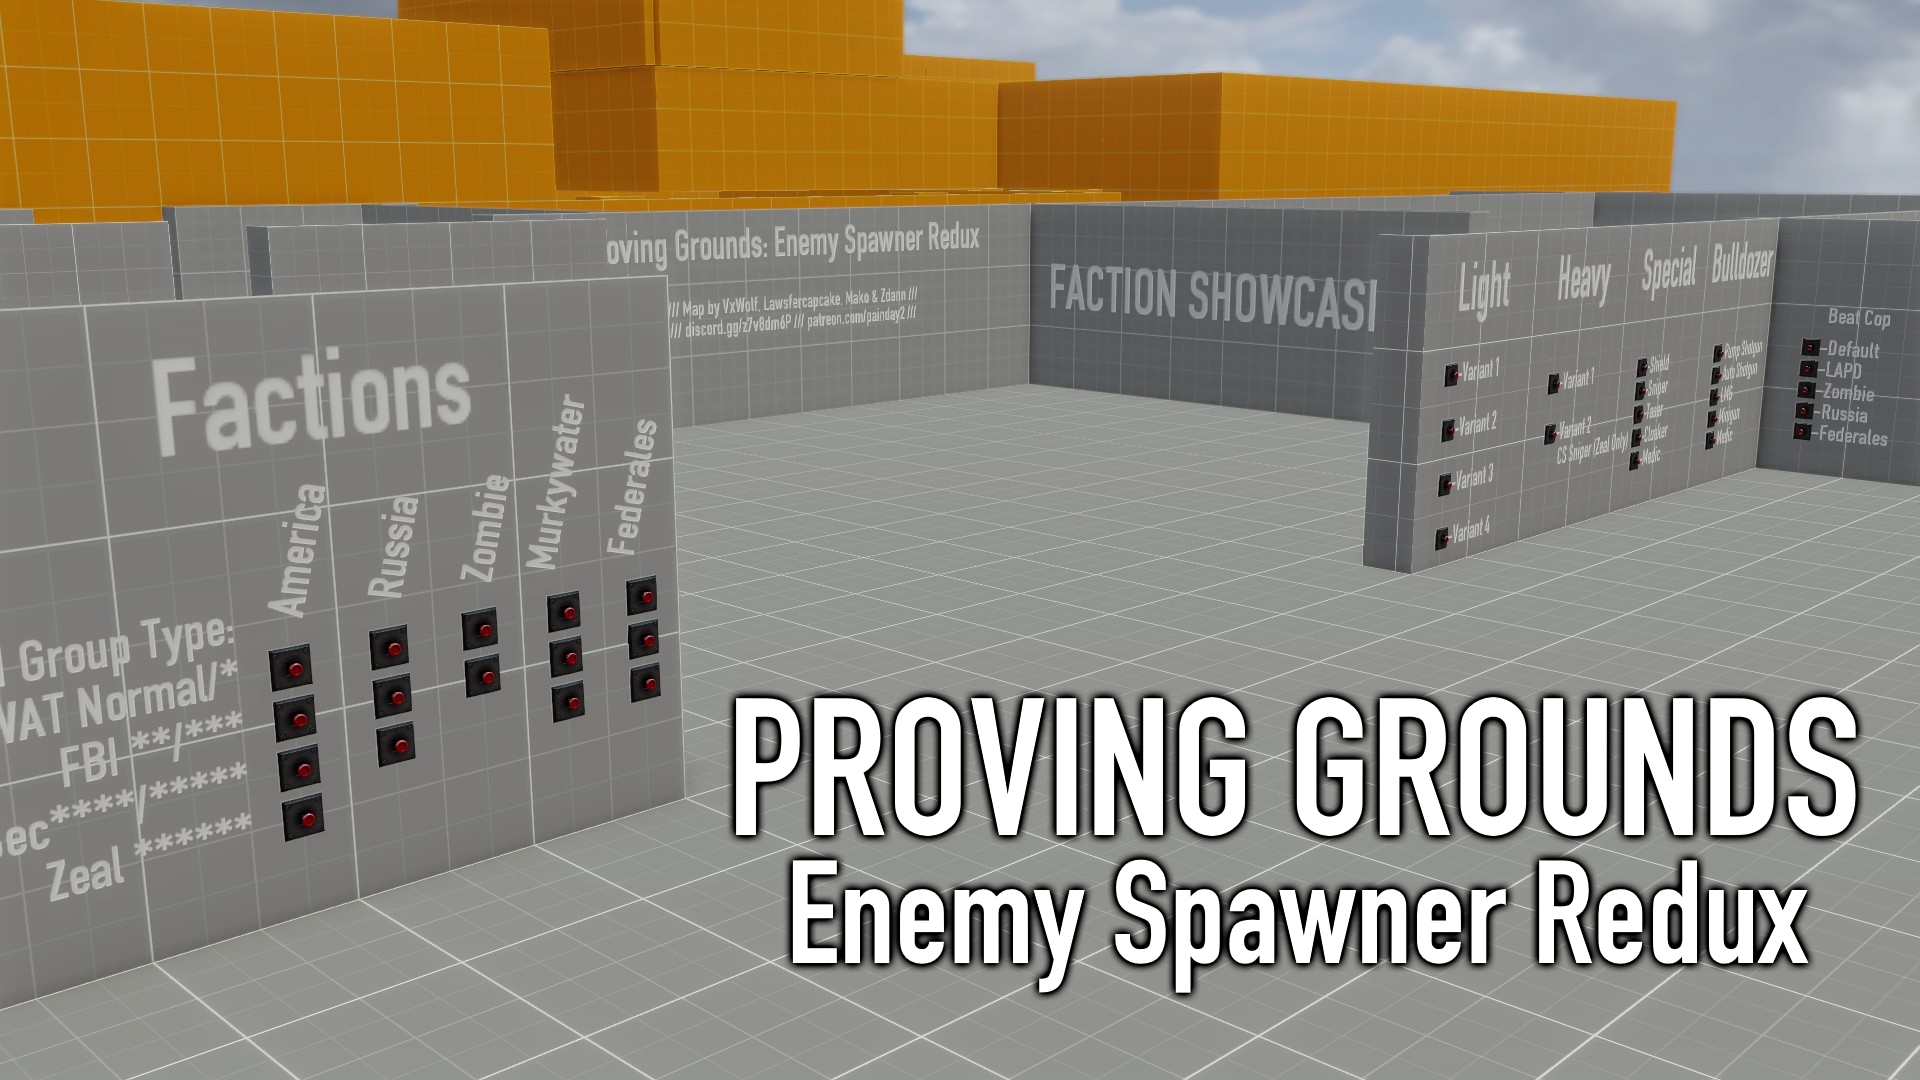 Мод Ragdoll Spawner. Create Mechanical Spawner. Proving grounds achievements. If transform.position.y < 0 && !Spawner. Id 17 connection attempt